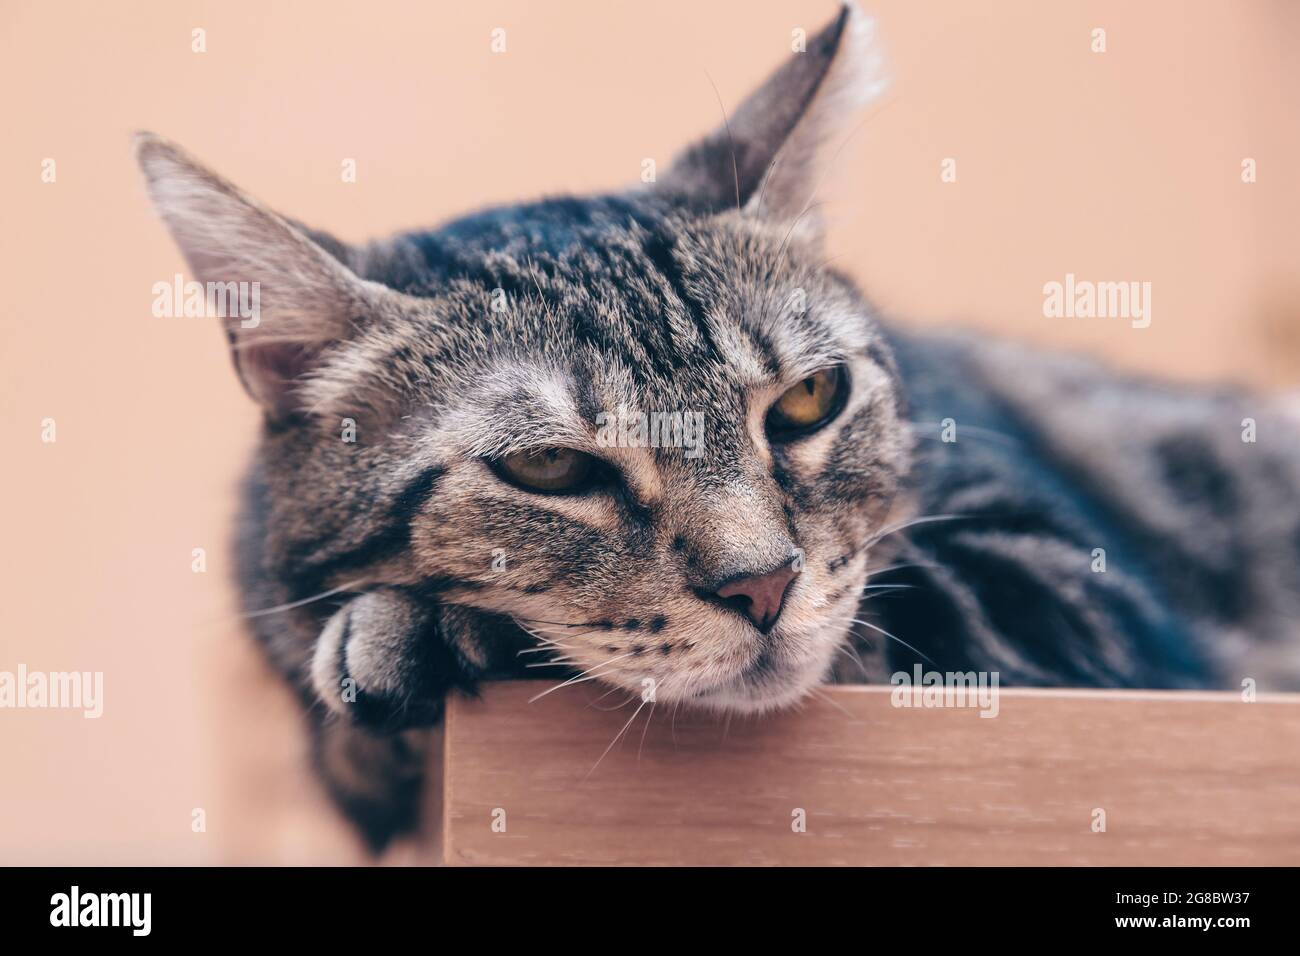 Lazy cat, relaxed cat on a table, relaxed and quiet pet Stock Photo